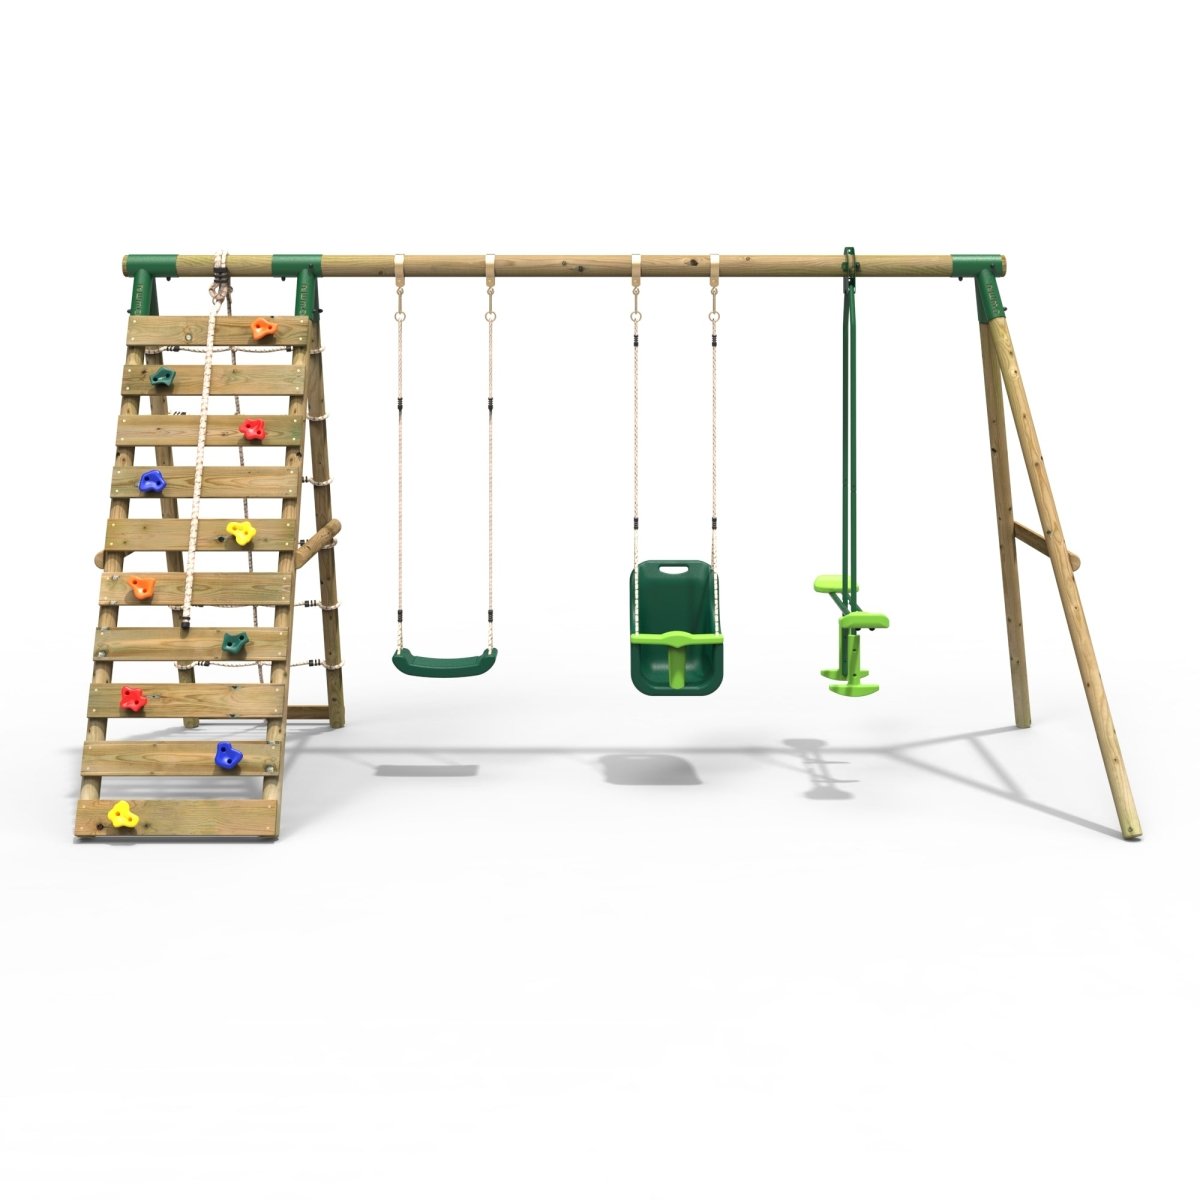 Rebo Wooden Swing Set with Up and Over Climbing Wall - Sienna Green